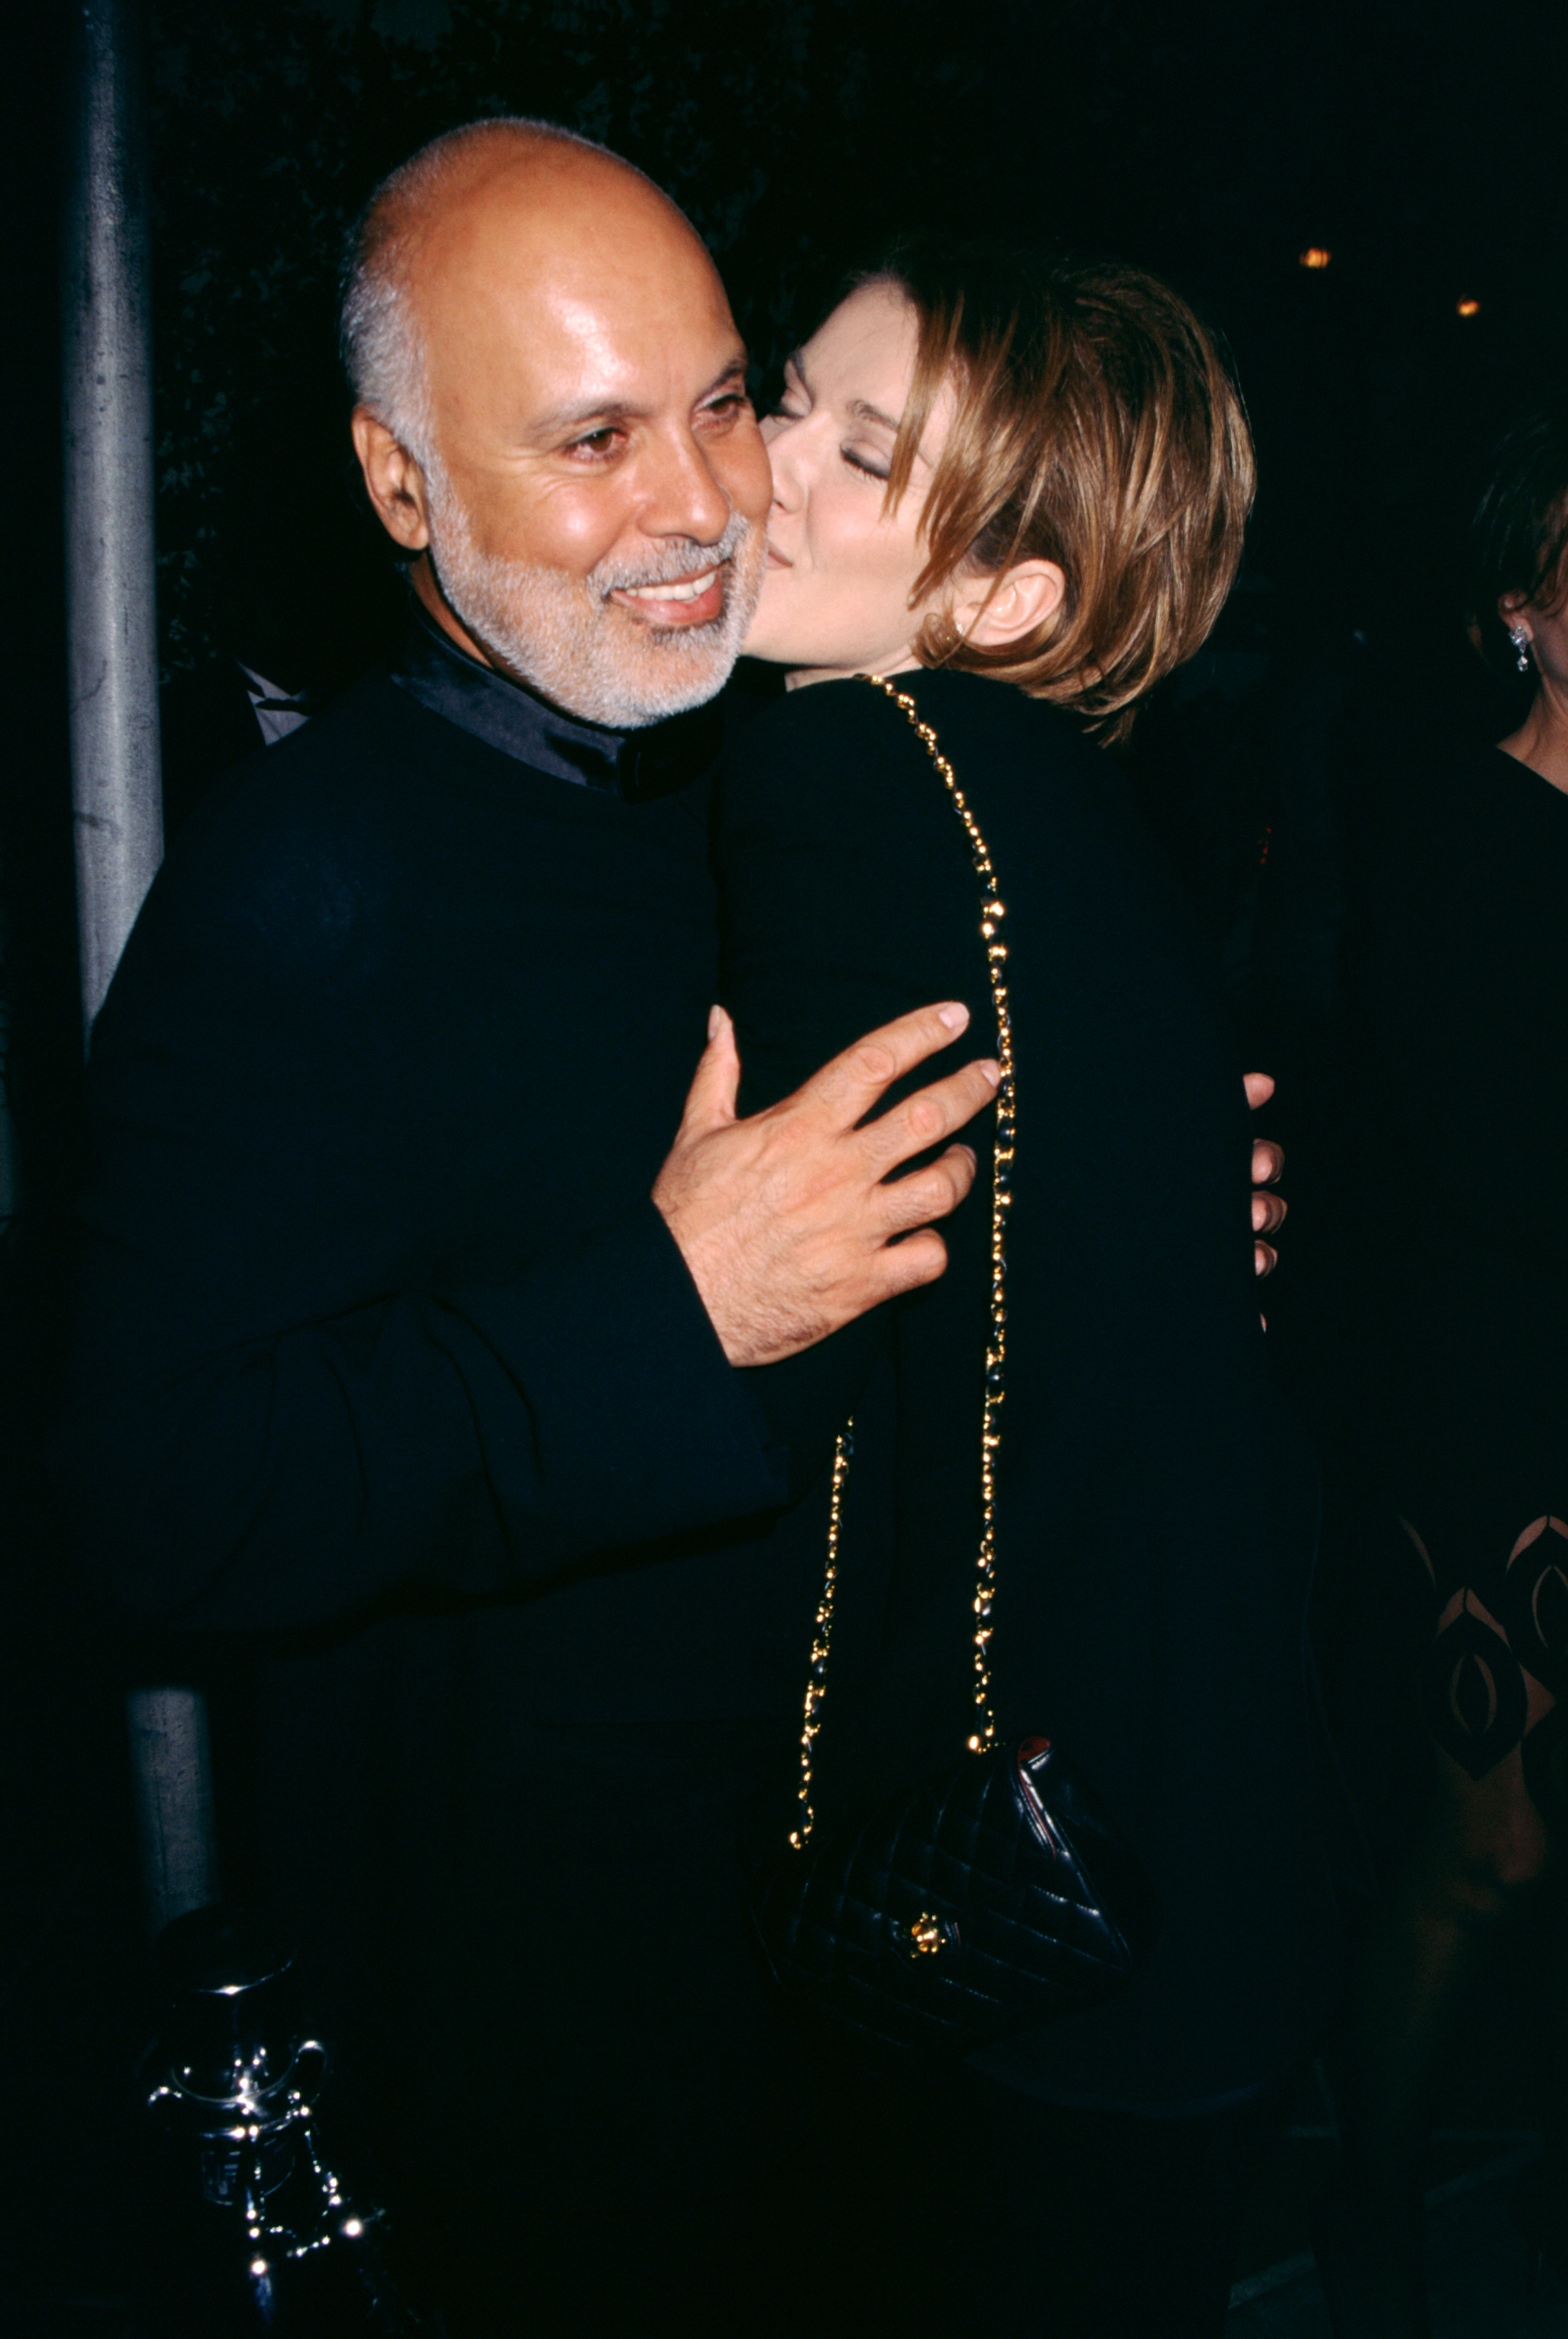 Rene Angelil and Celine Dion during the 38th Annual Grammy Awards on February 28, 1996 in Los Angeles, California. | Source: Getty Images